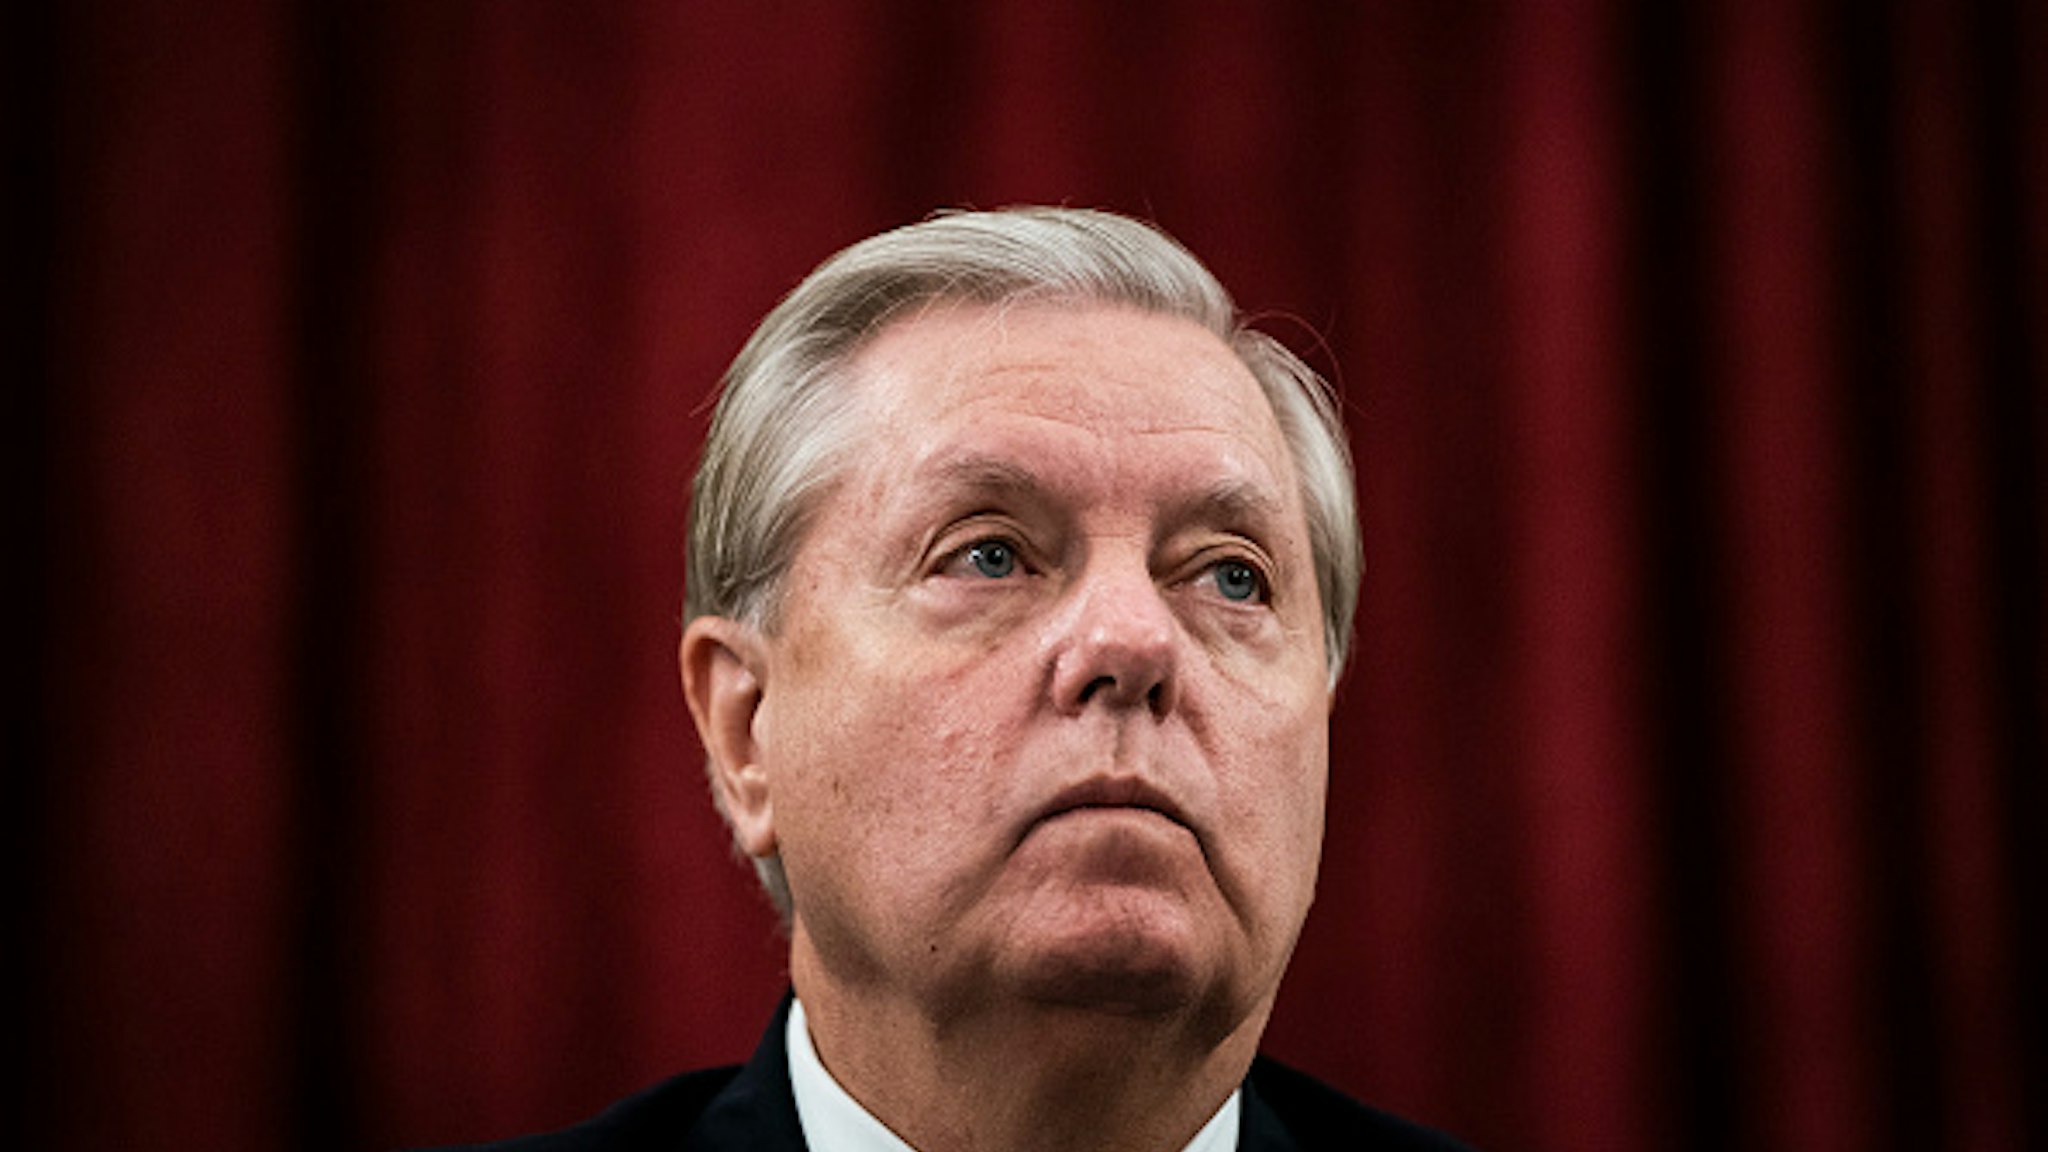 WASHINGTON, DC - SEPTEMBER 24: Chairman Lindsey Graham, R-S.C., listens during a Senate Judiciary Committee business meeting on Capitol Hill on Thursday, Sept 24, 2020 in Washington, DC.